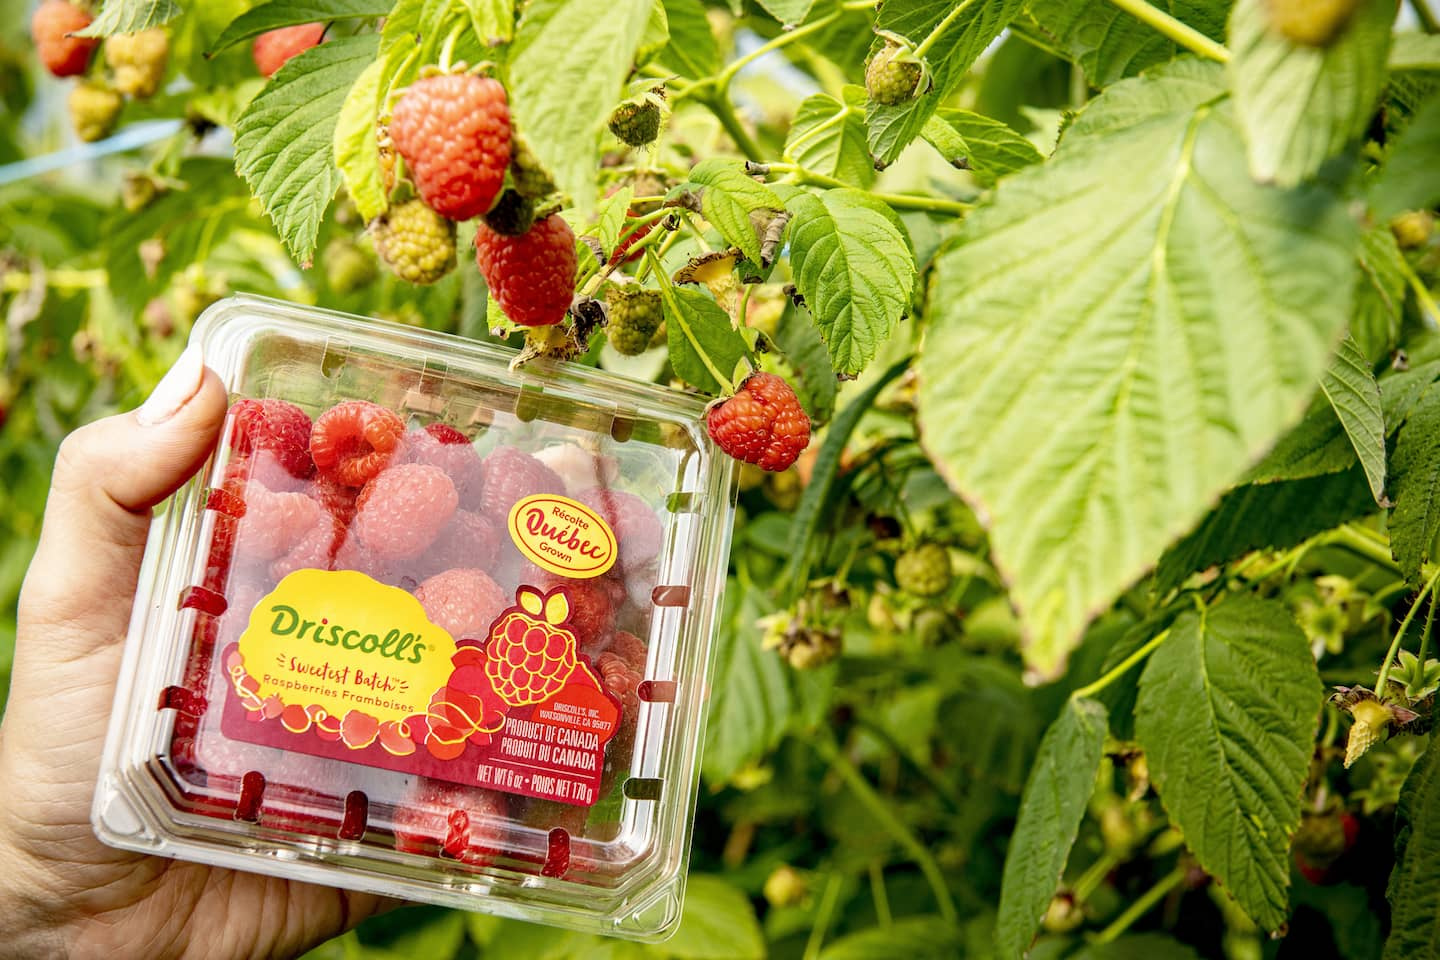 The giant Driscoll’s arrives: American raspberries grown... in Quebec